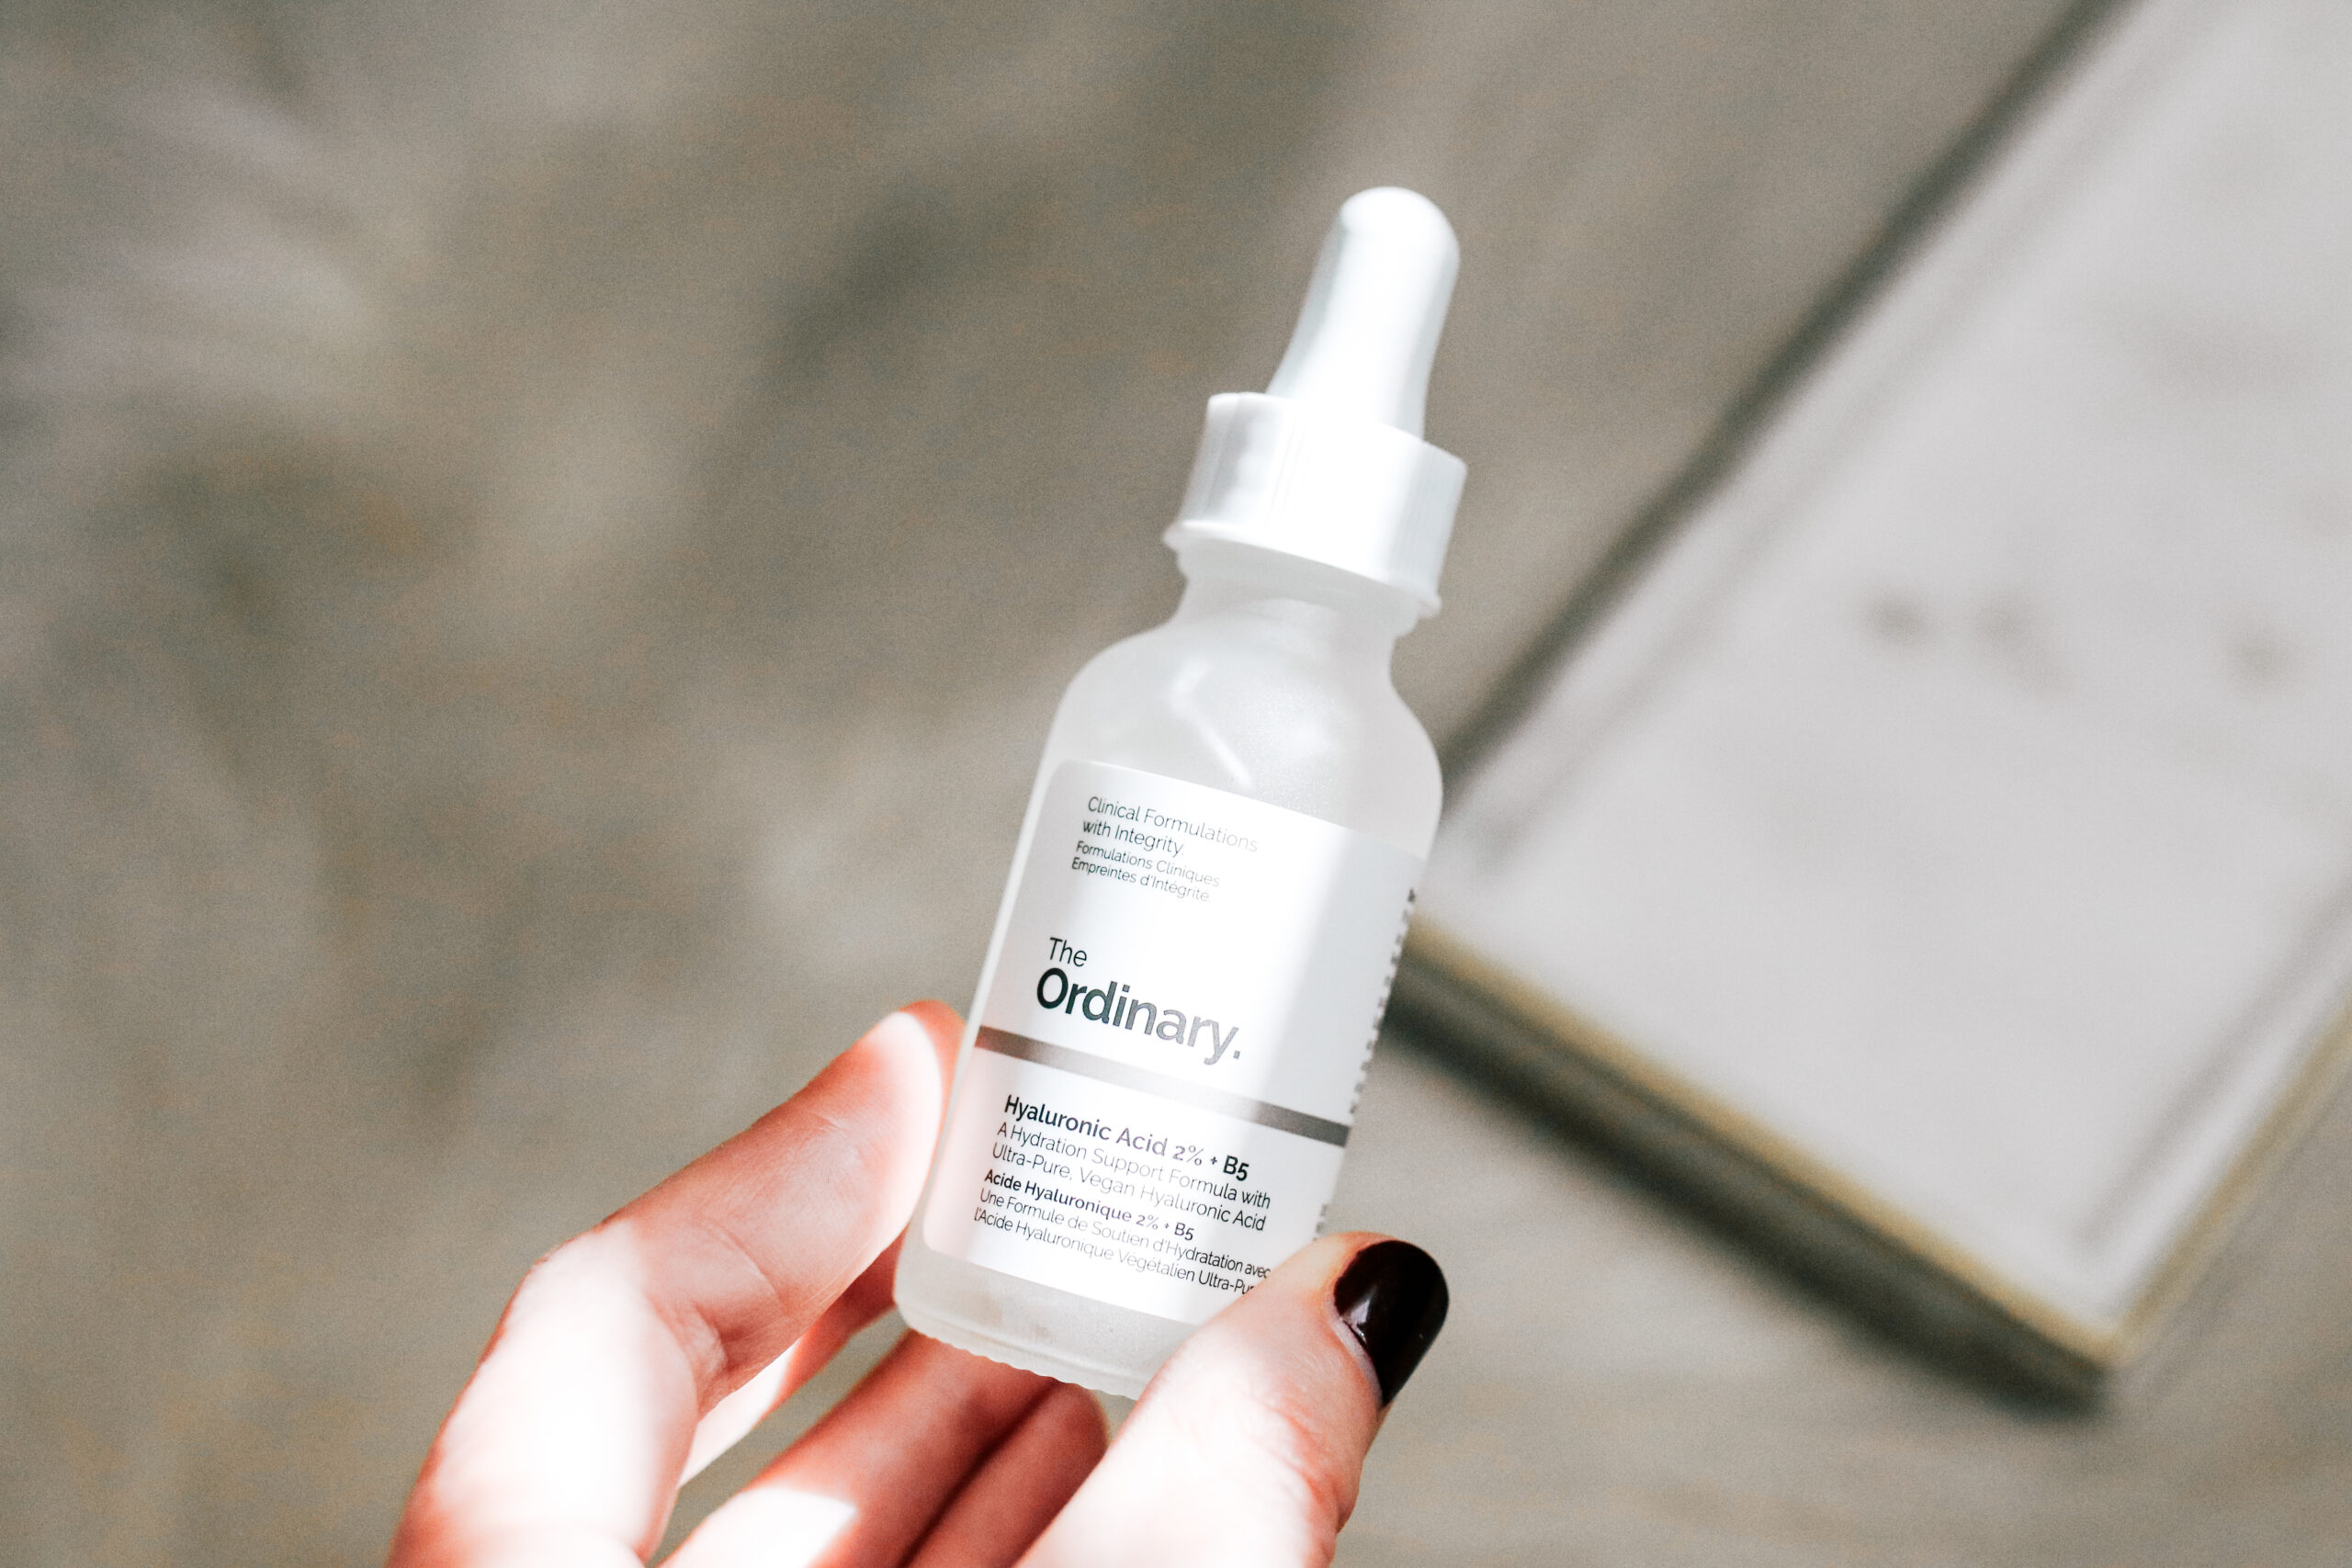 The ordinary hyaluronic acid 2 B5 review